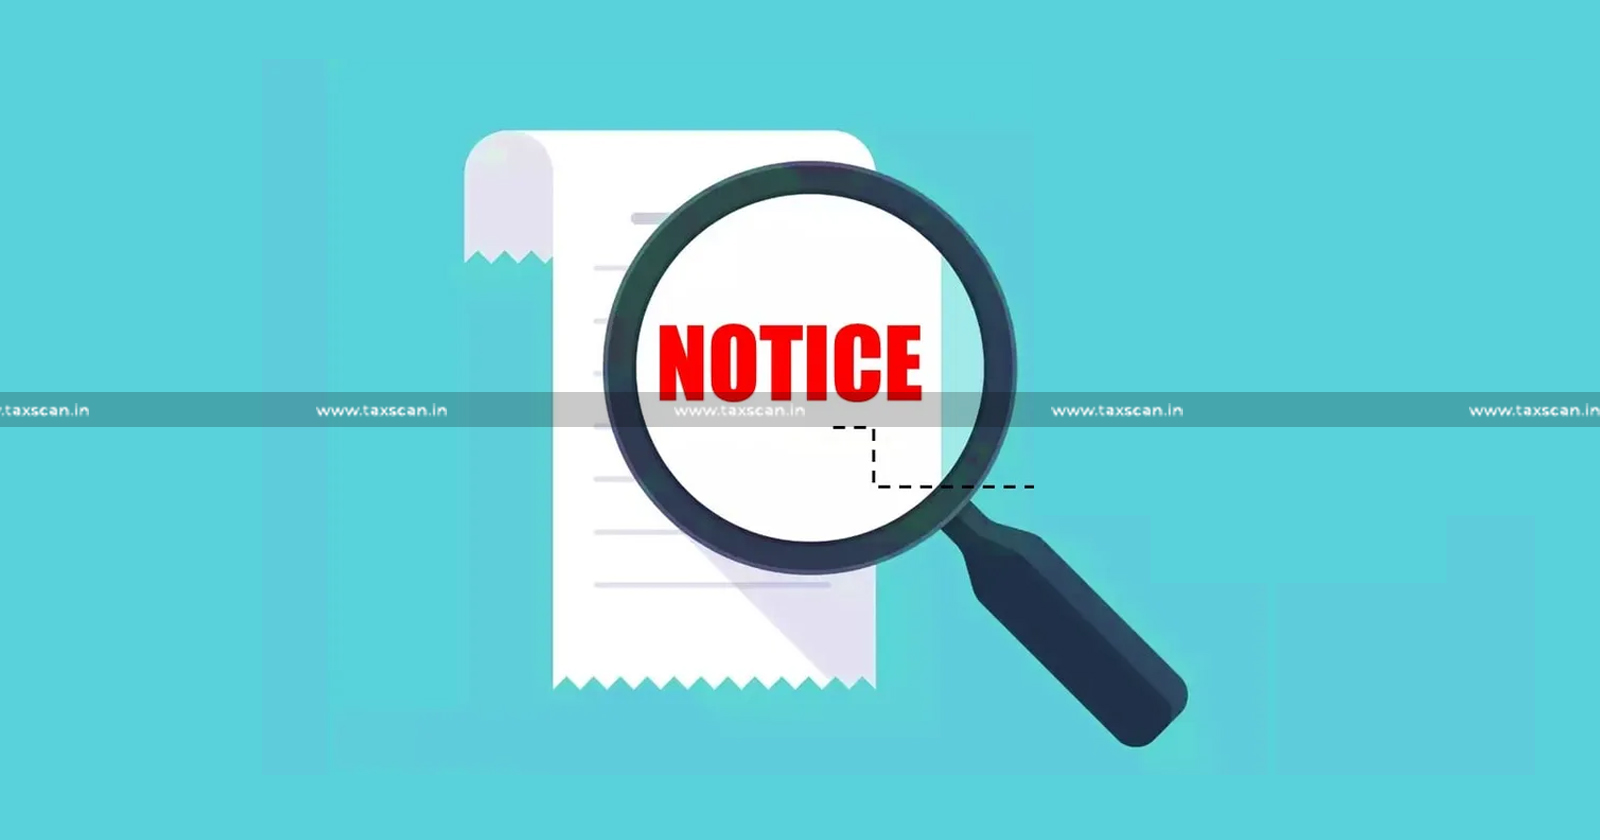 Income Tax Dept clarifies Issuance of Notice - Deduction to Partnership Firms -Income Tax Dept - Issuance of Notice - LLPs not Claimed is Inadvertent Error - taxscan